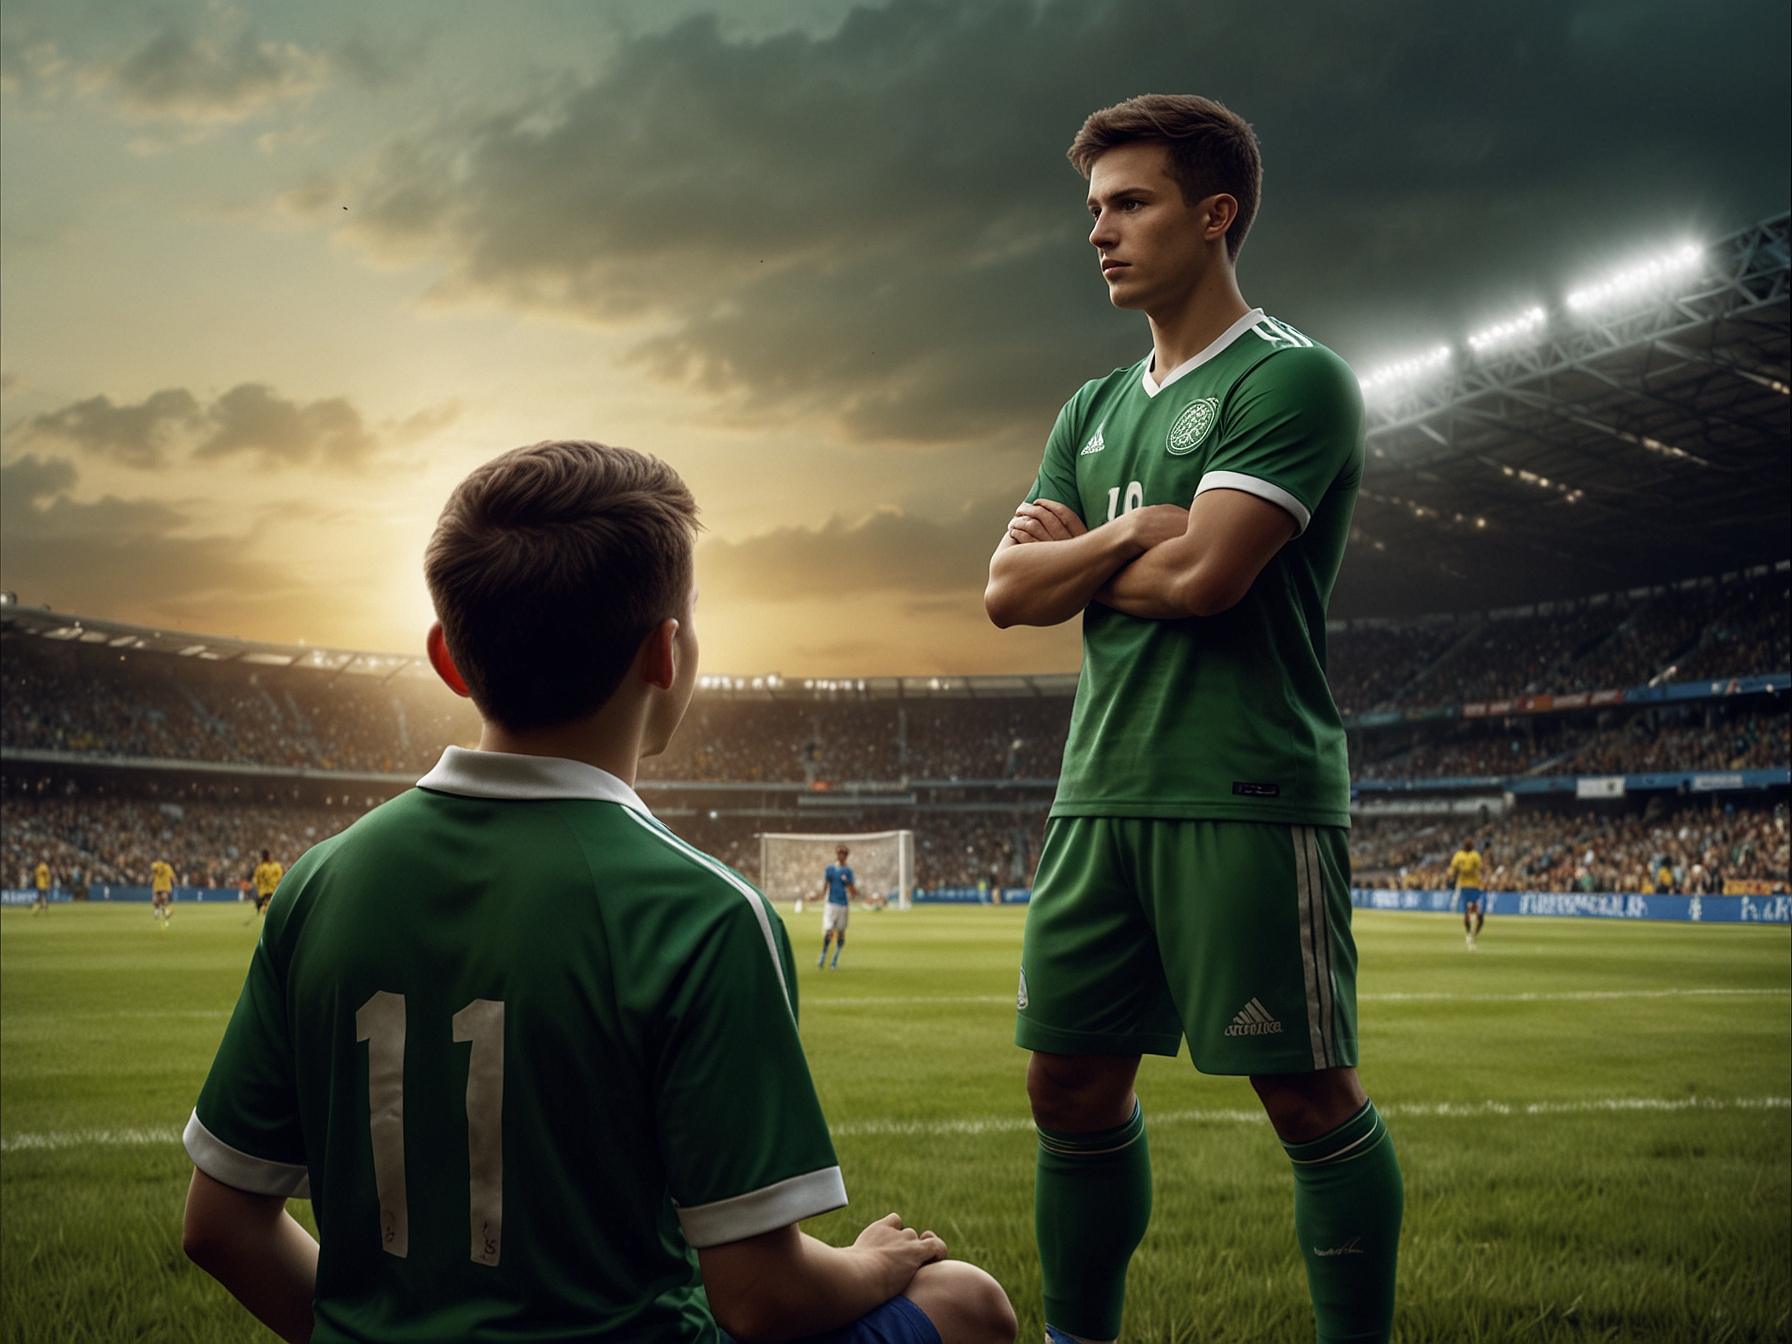 An illustration of a Celtic scout observing a promising young Copa America player on the field, symbolizing the club's keen interest in emerging talent.